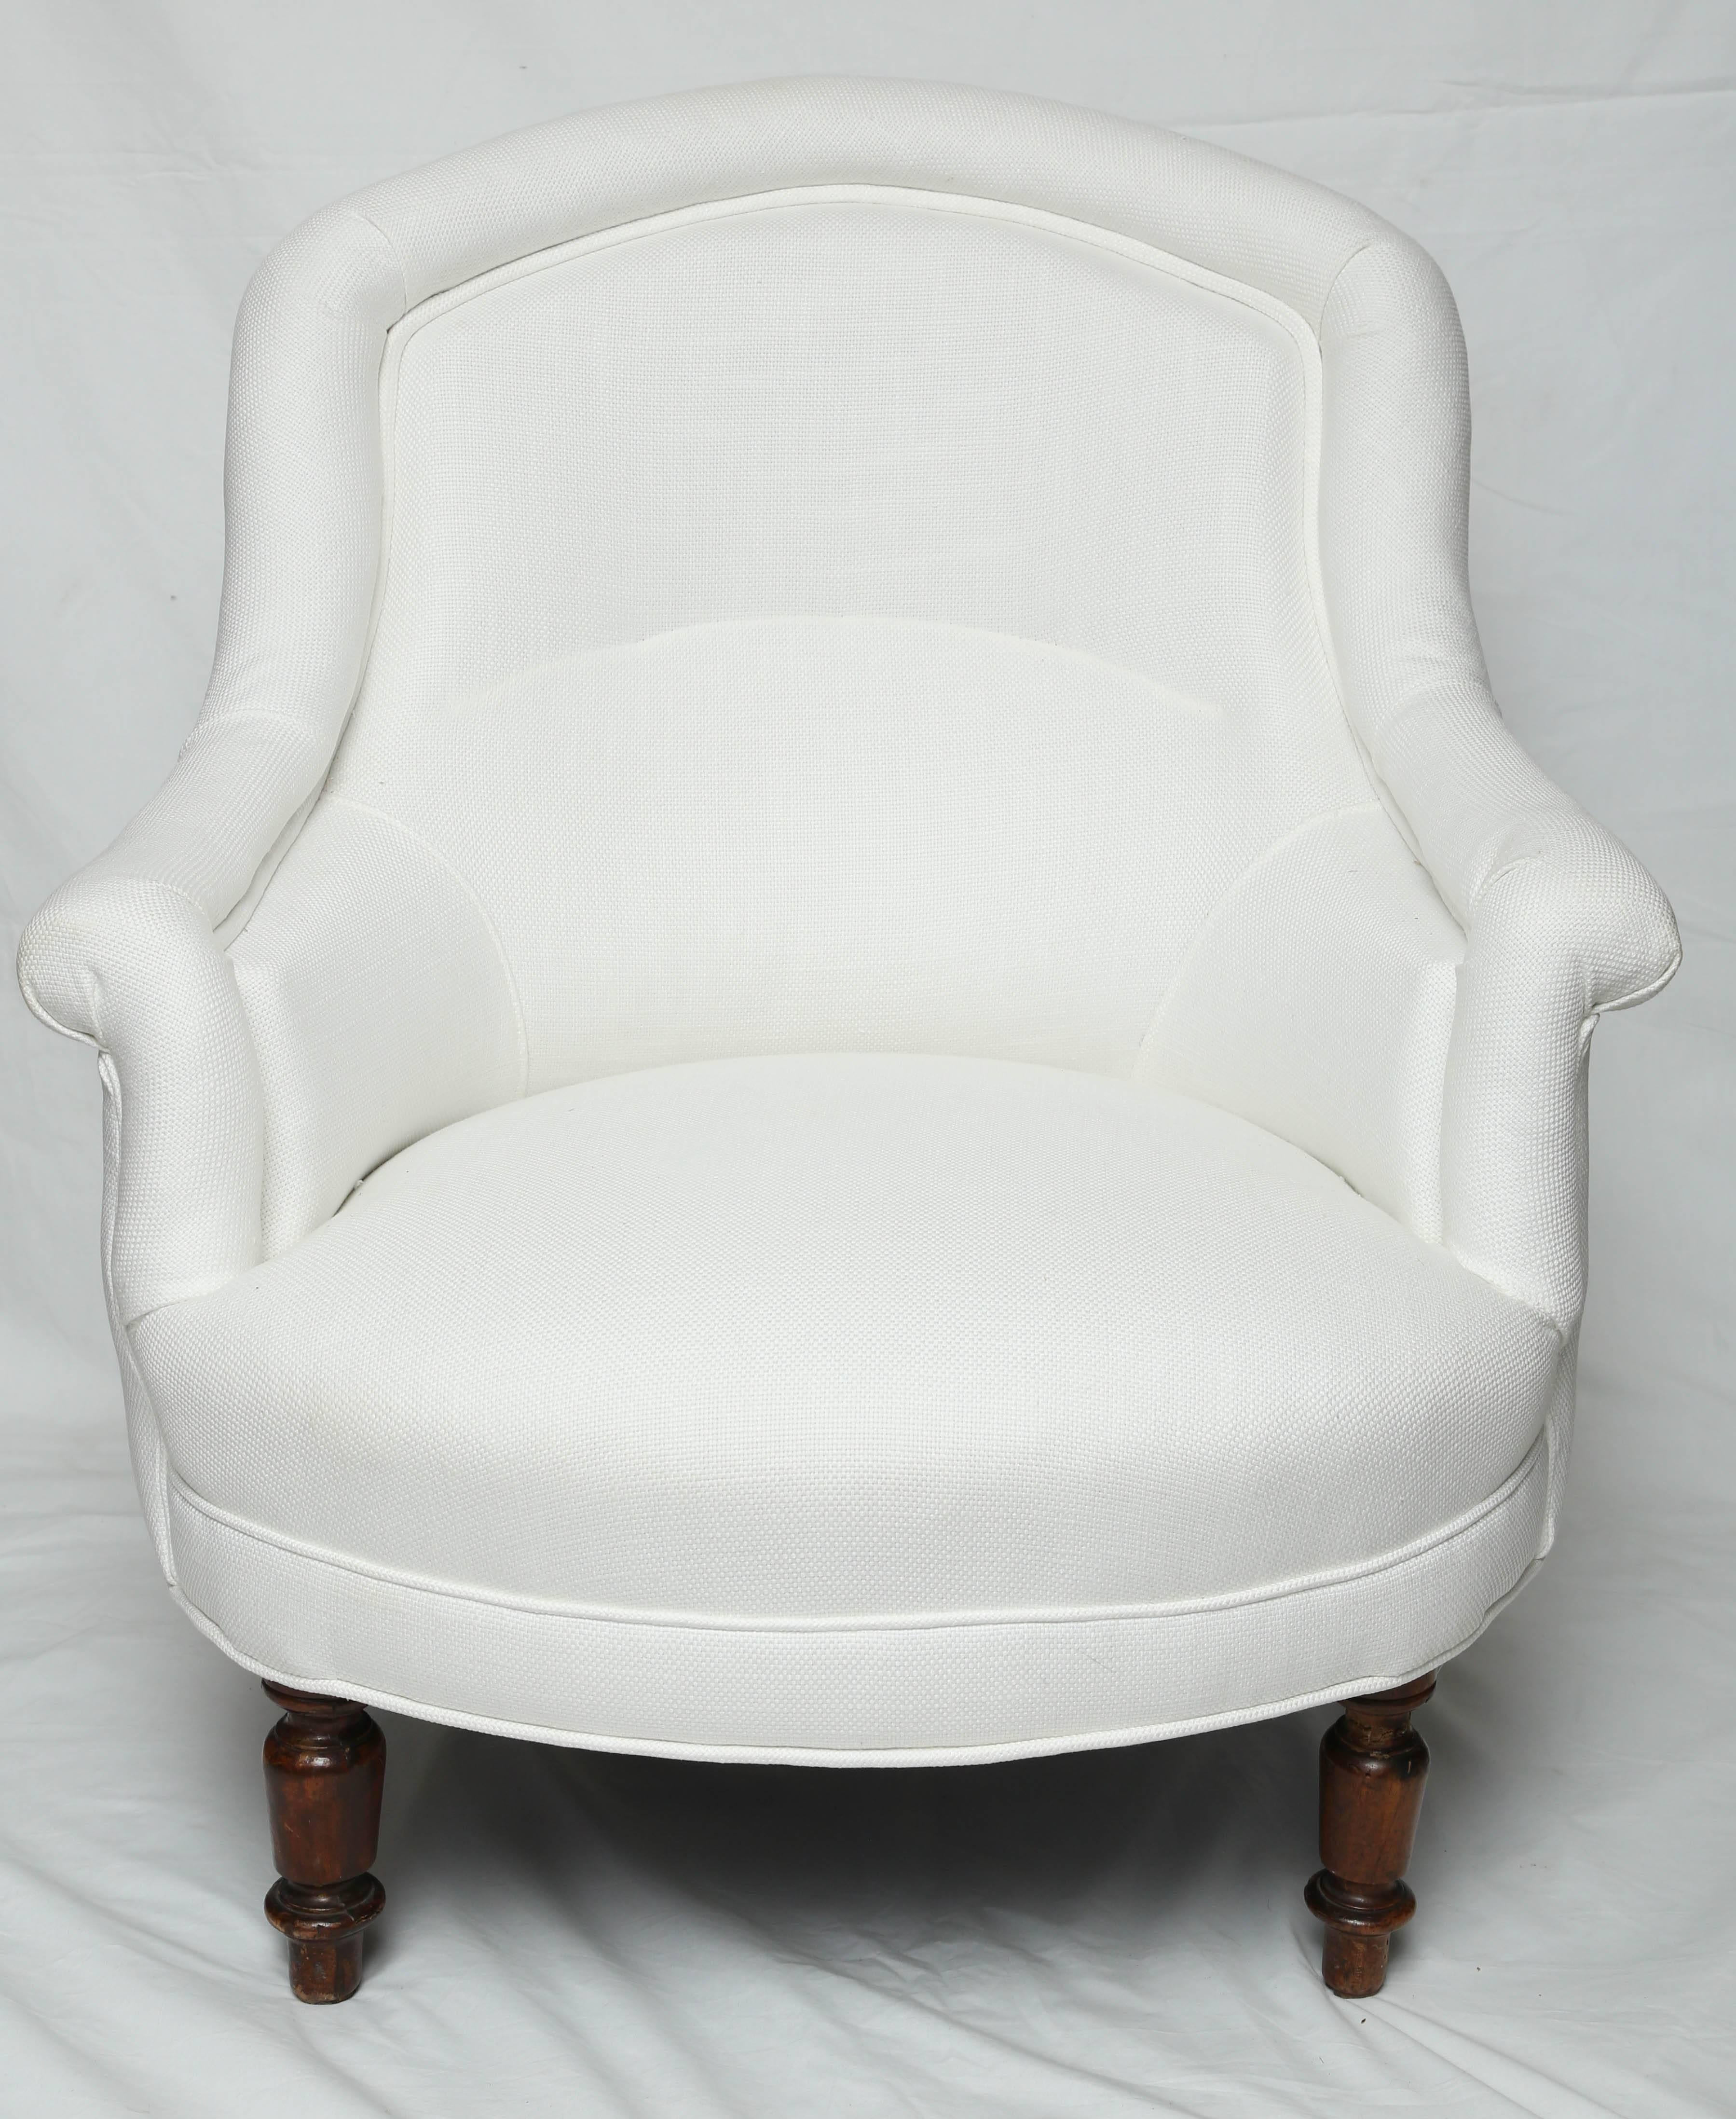 Late 19th century pair of charming Provençal French armchairs in white Egyptian linen. Perfect for bedroom, small room or fire place.